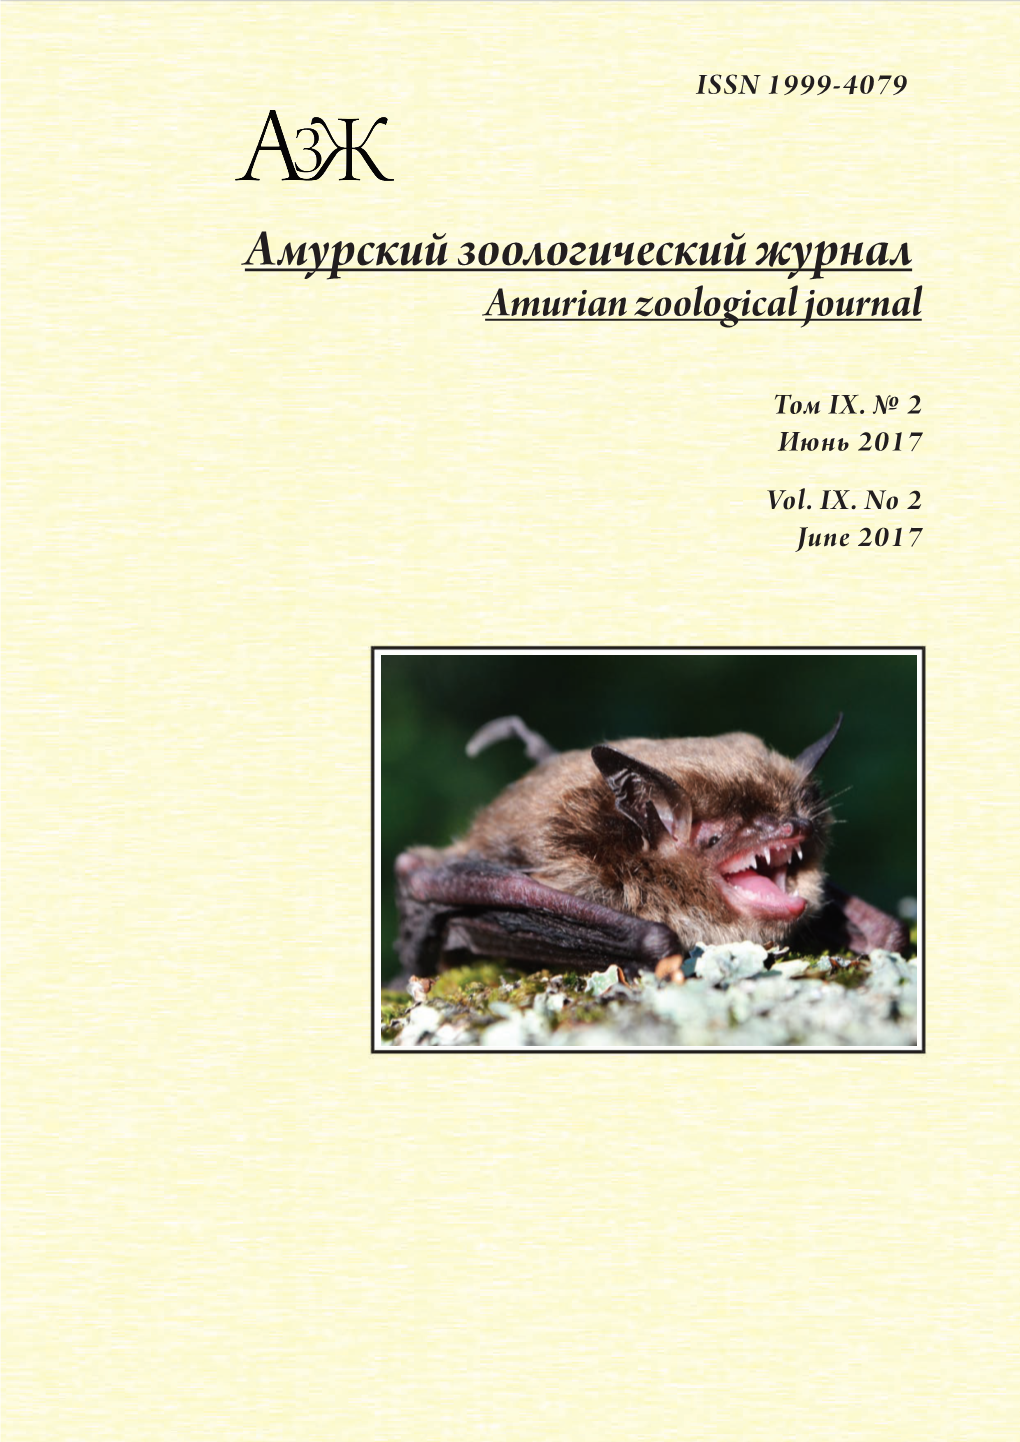 Amurian Zoological Journal